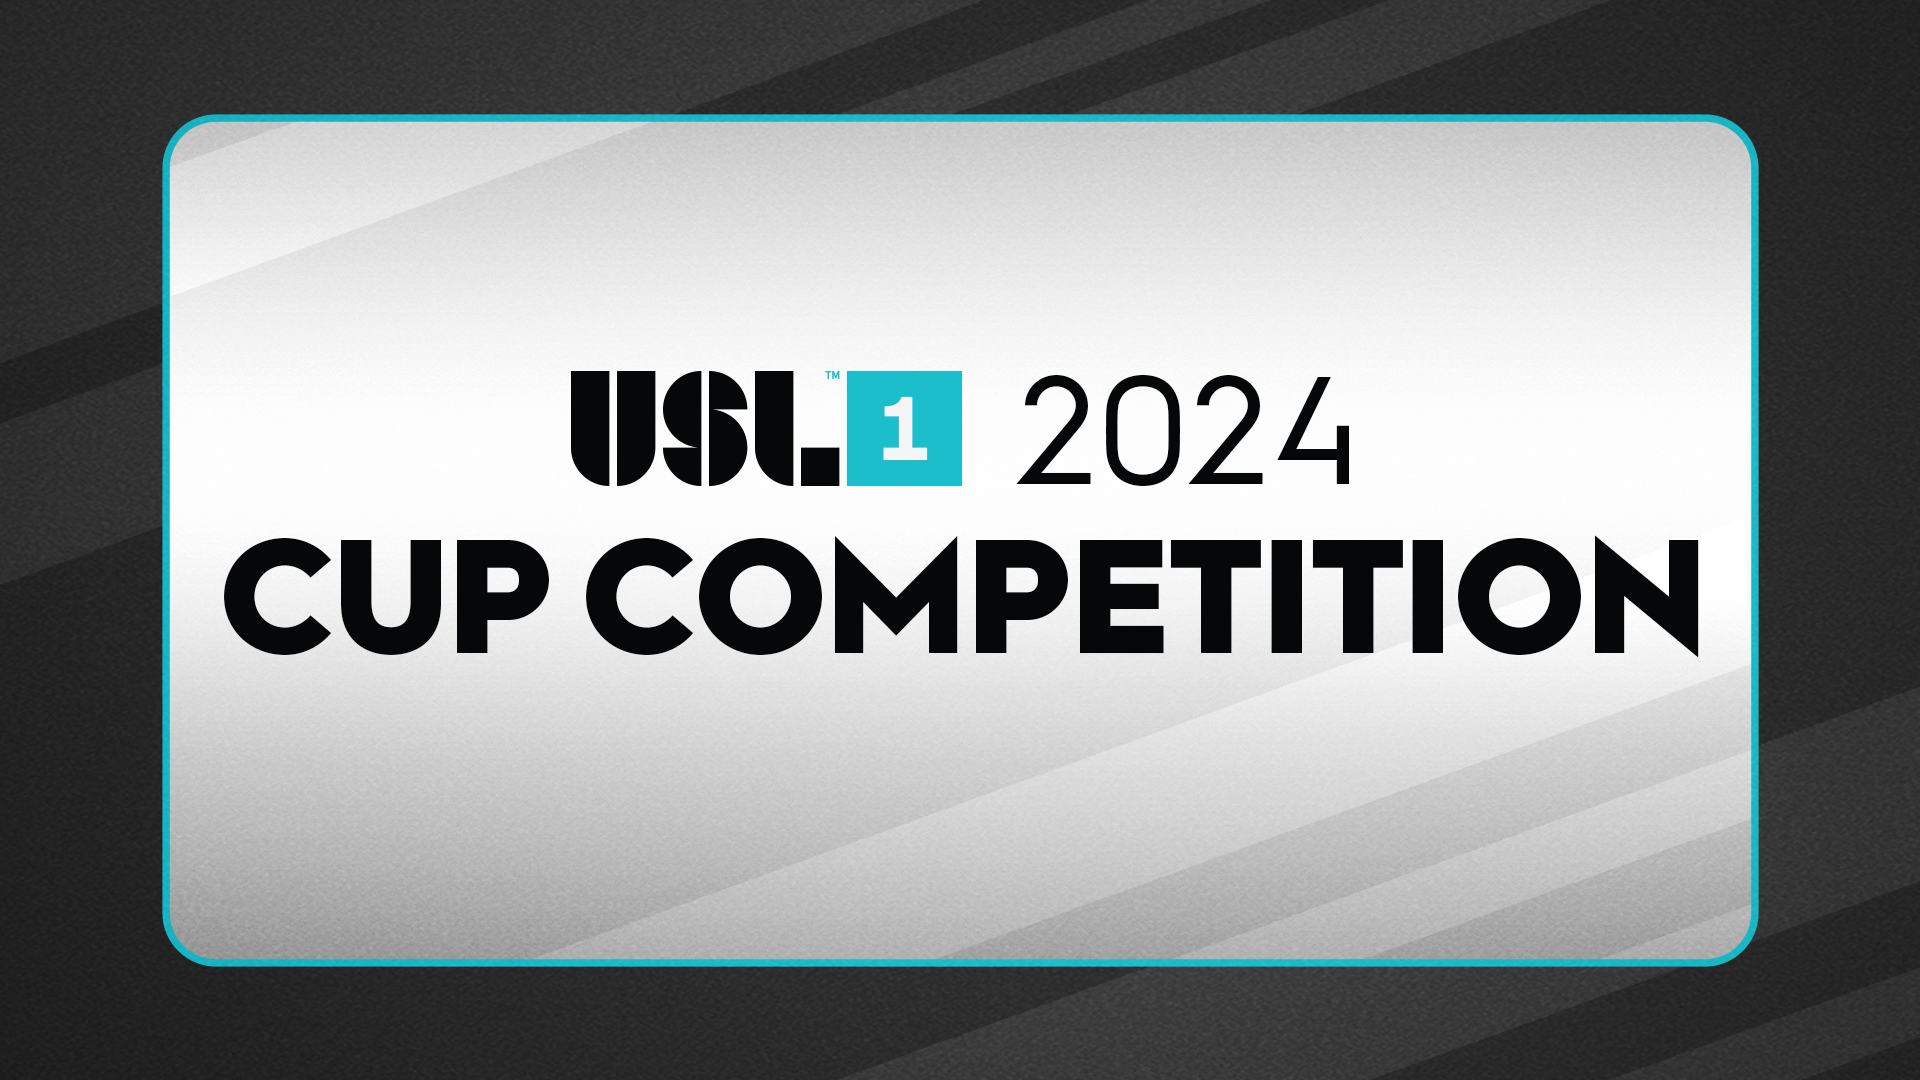 With an Eye to the Future, USL League One Introduces Exciting New Cup Competition featured image